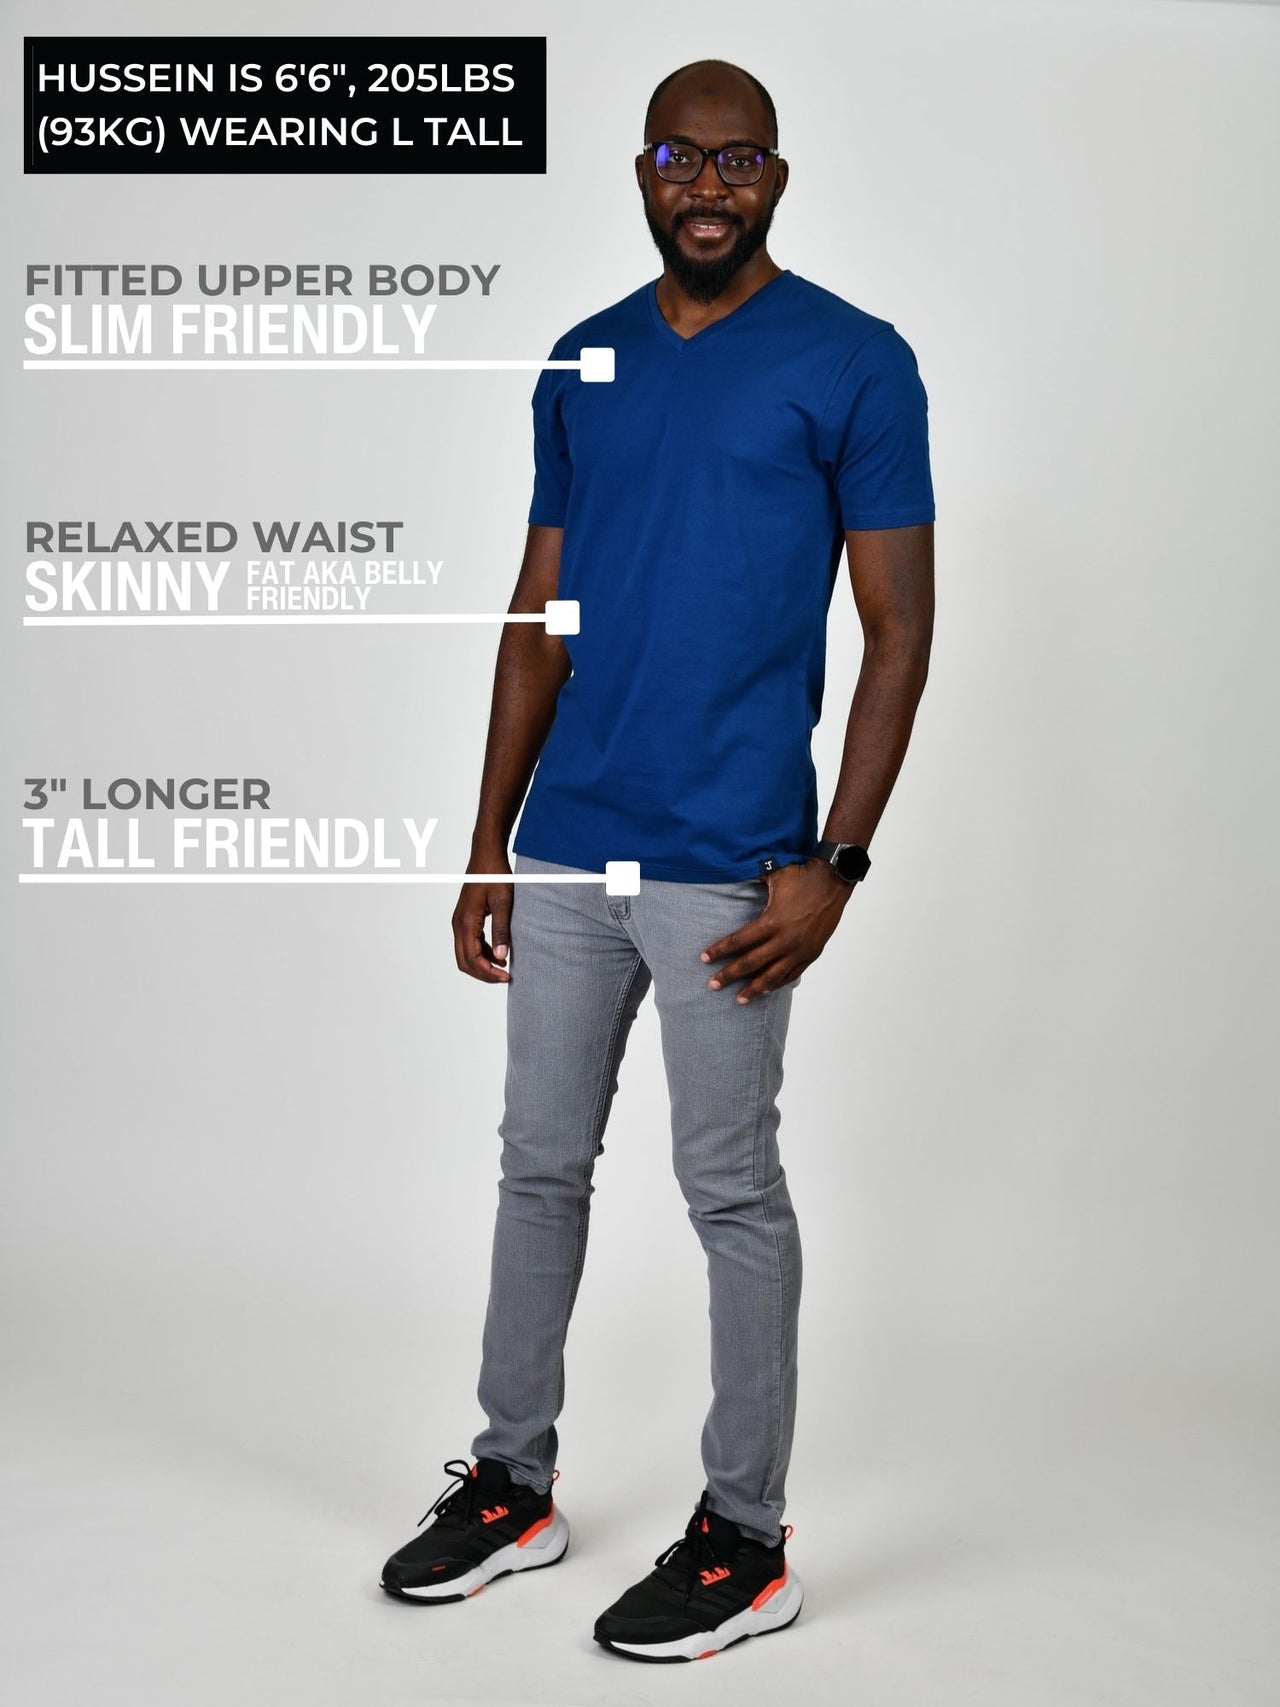 A head to toe shot of a tall athletic guy wearing a navy large tall t-shirt.